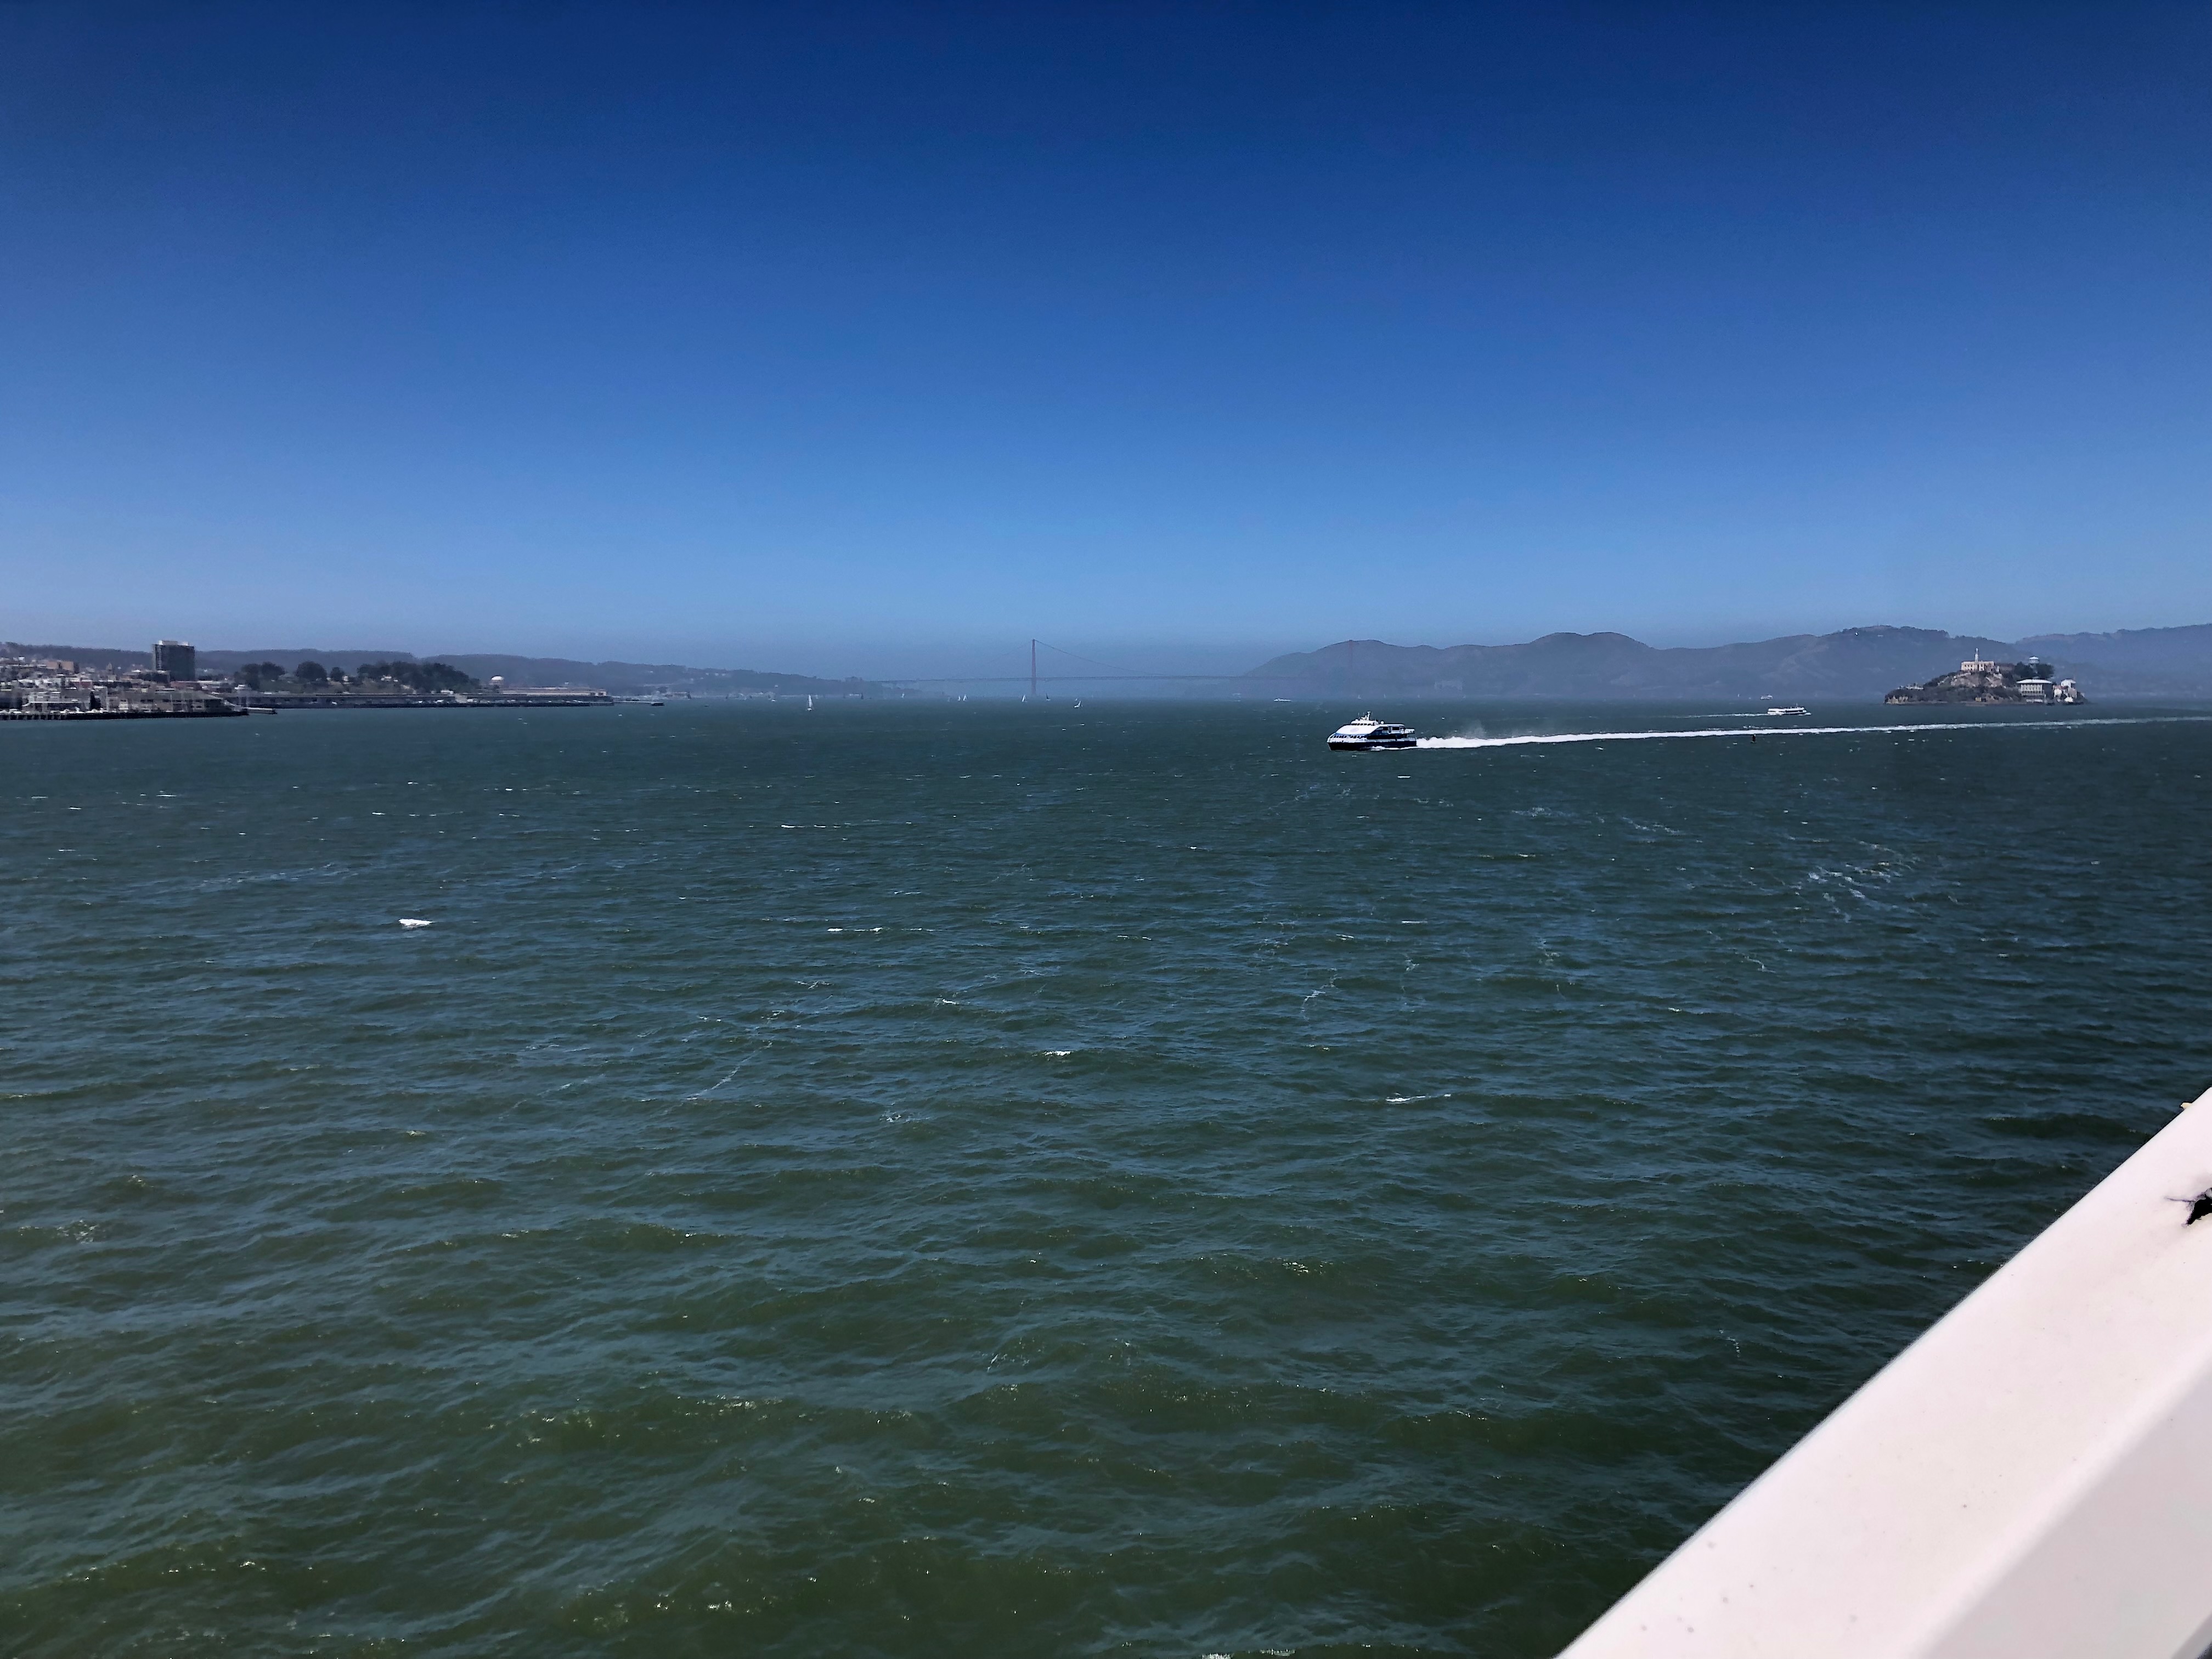 Fast Ferry passes by the TSGB while we make way to the San Francisco Golden Gate Bridge